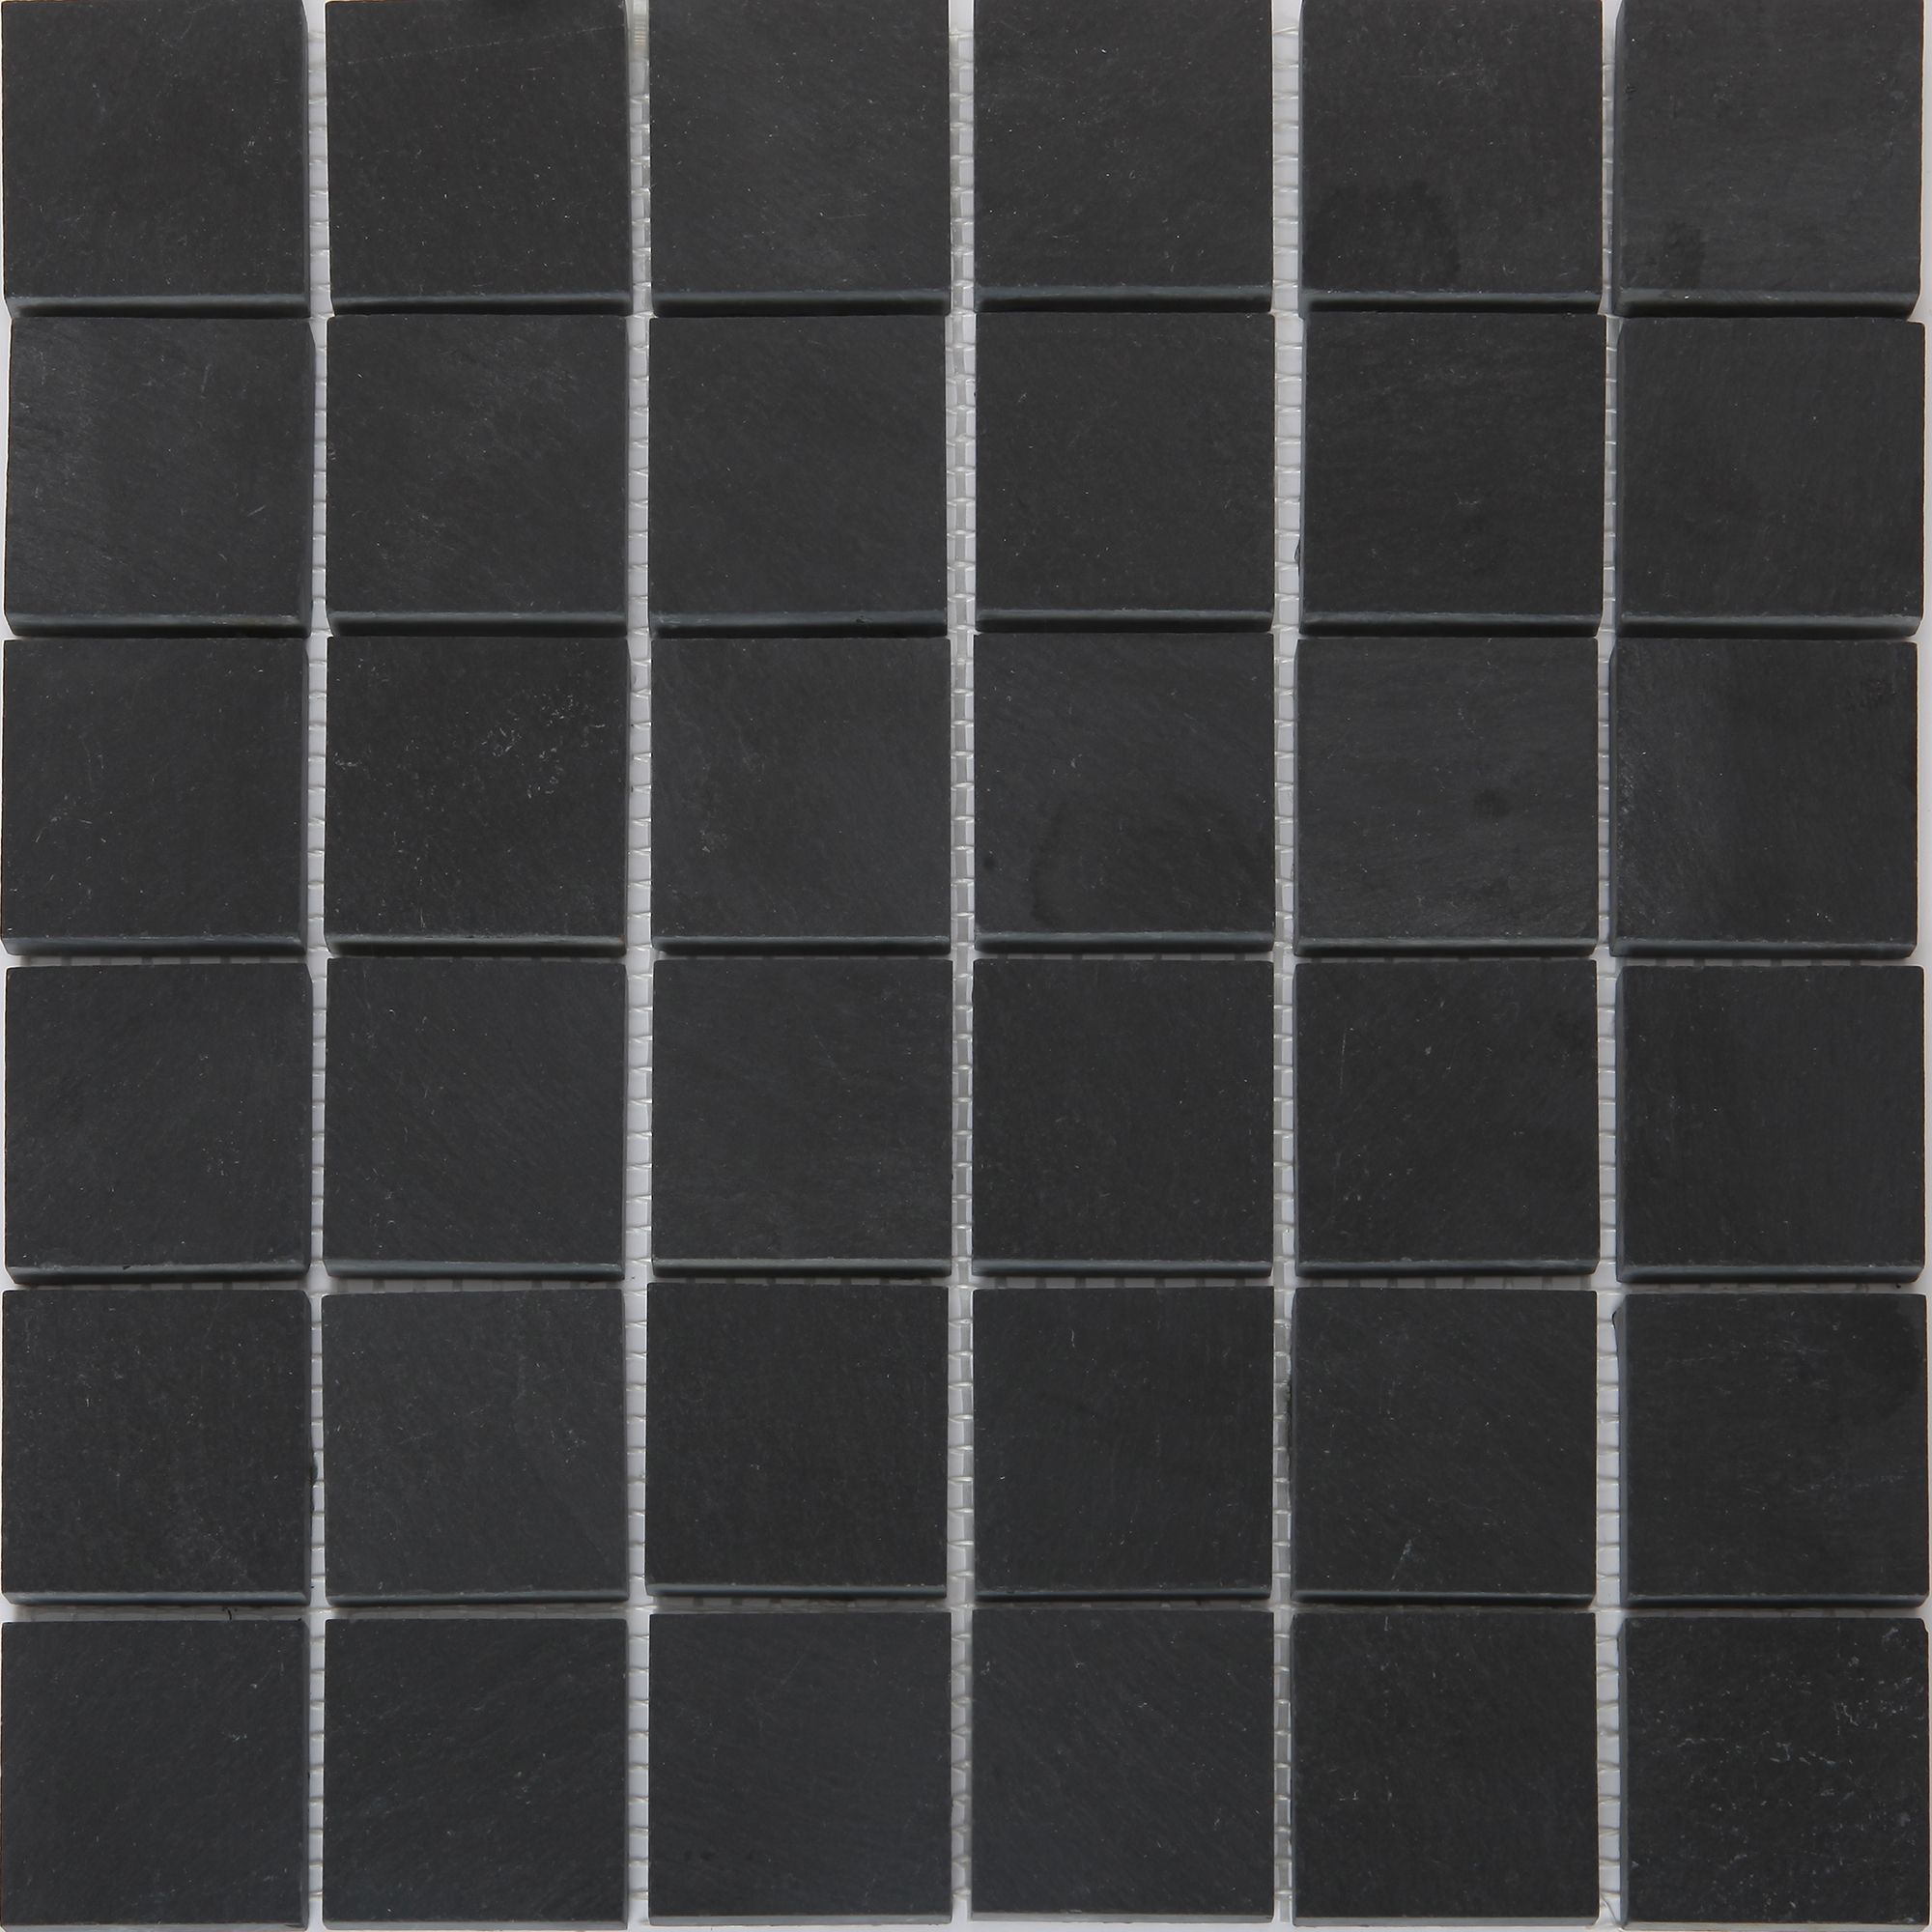 Slate Anthracite Polished Matt Stone effect Natural structure Natural stone Mosaic tile sheet, (L)303mm (W)304mm